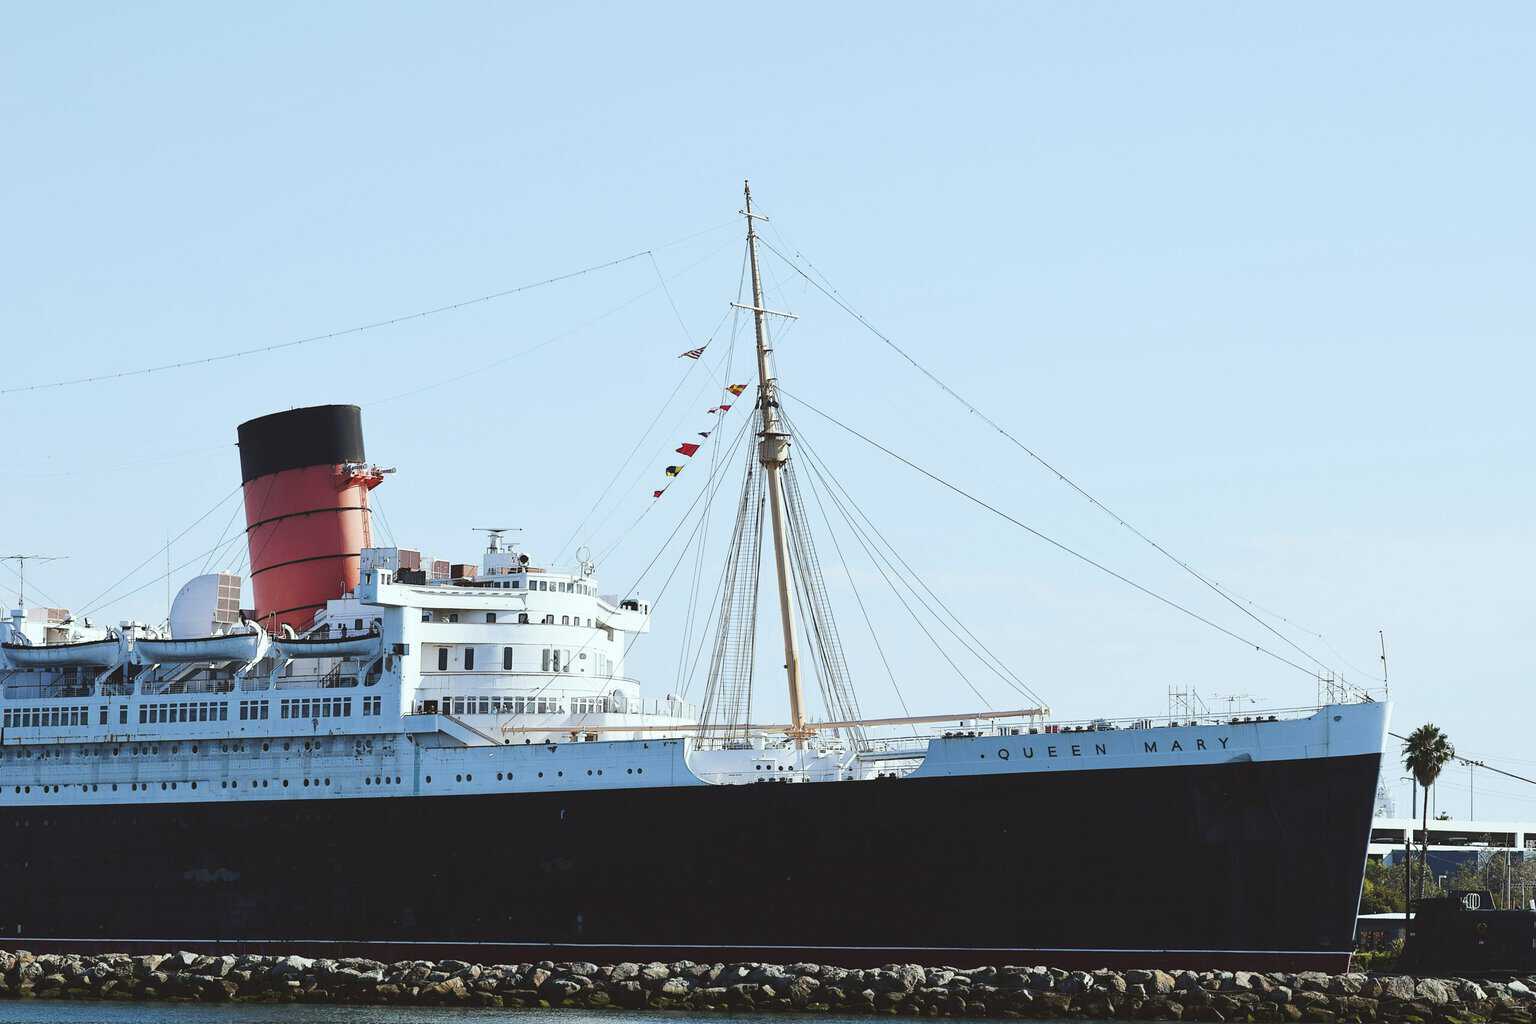 The Queen Mary 1